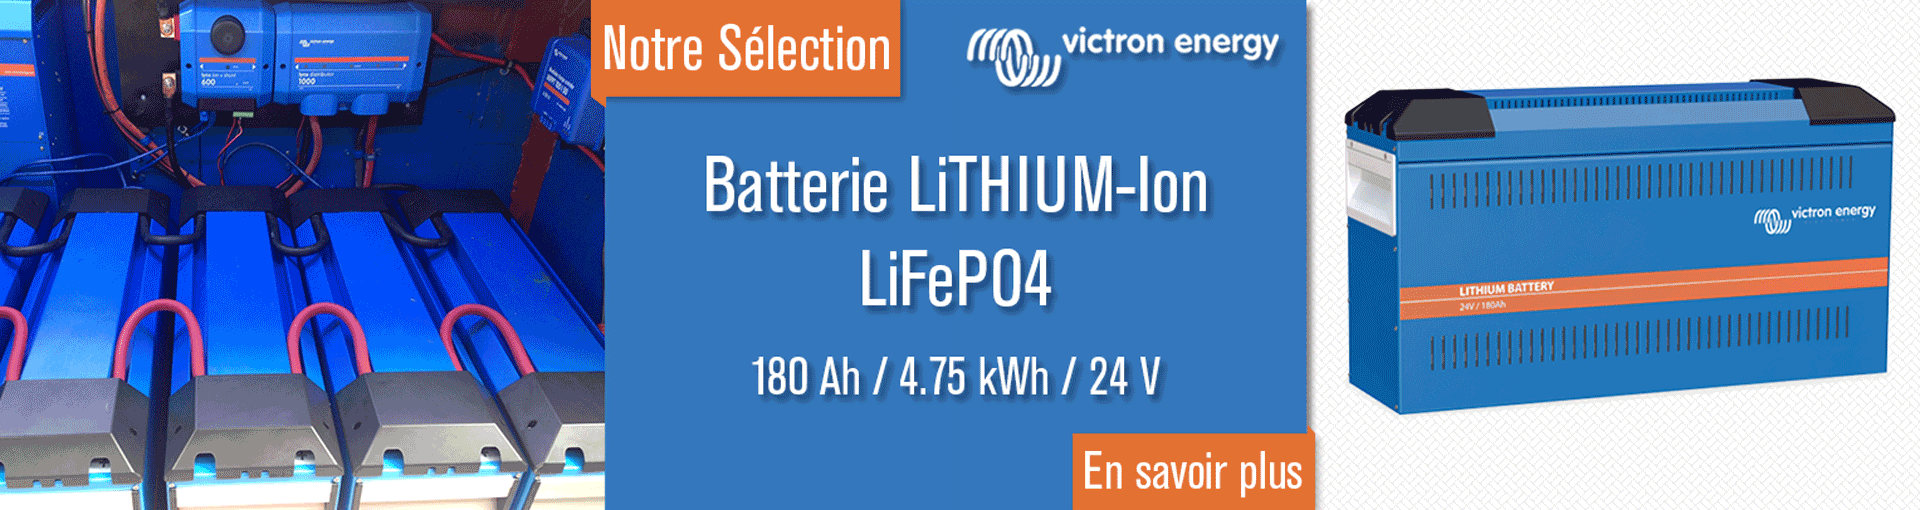 Batterie lithium ion LifePo4 Victron Energy